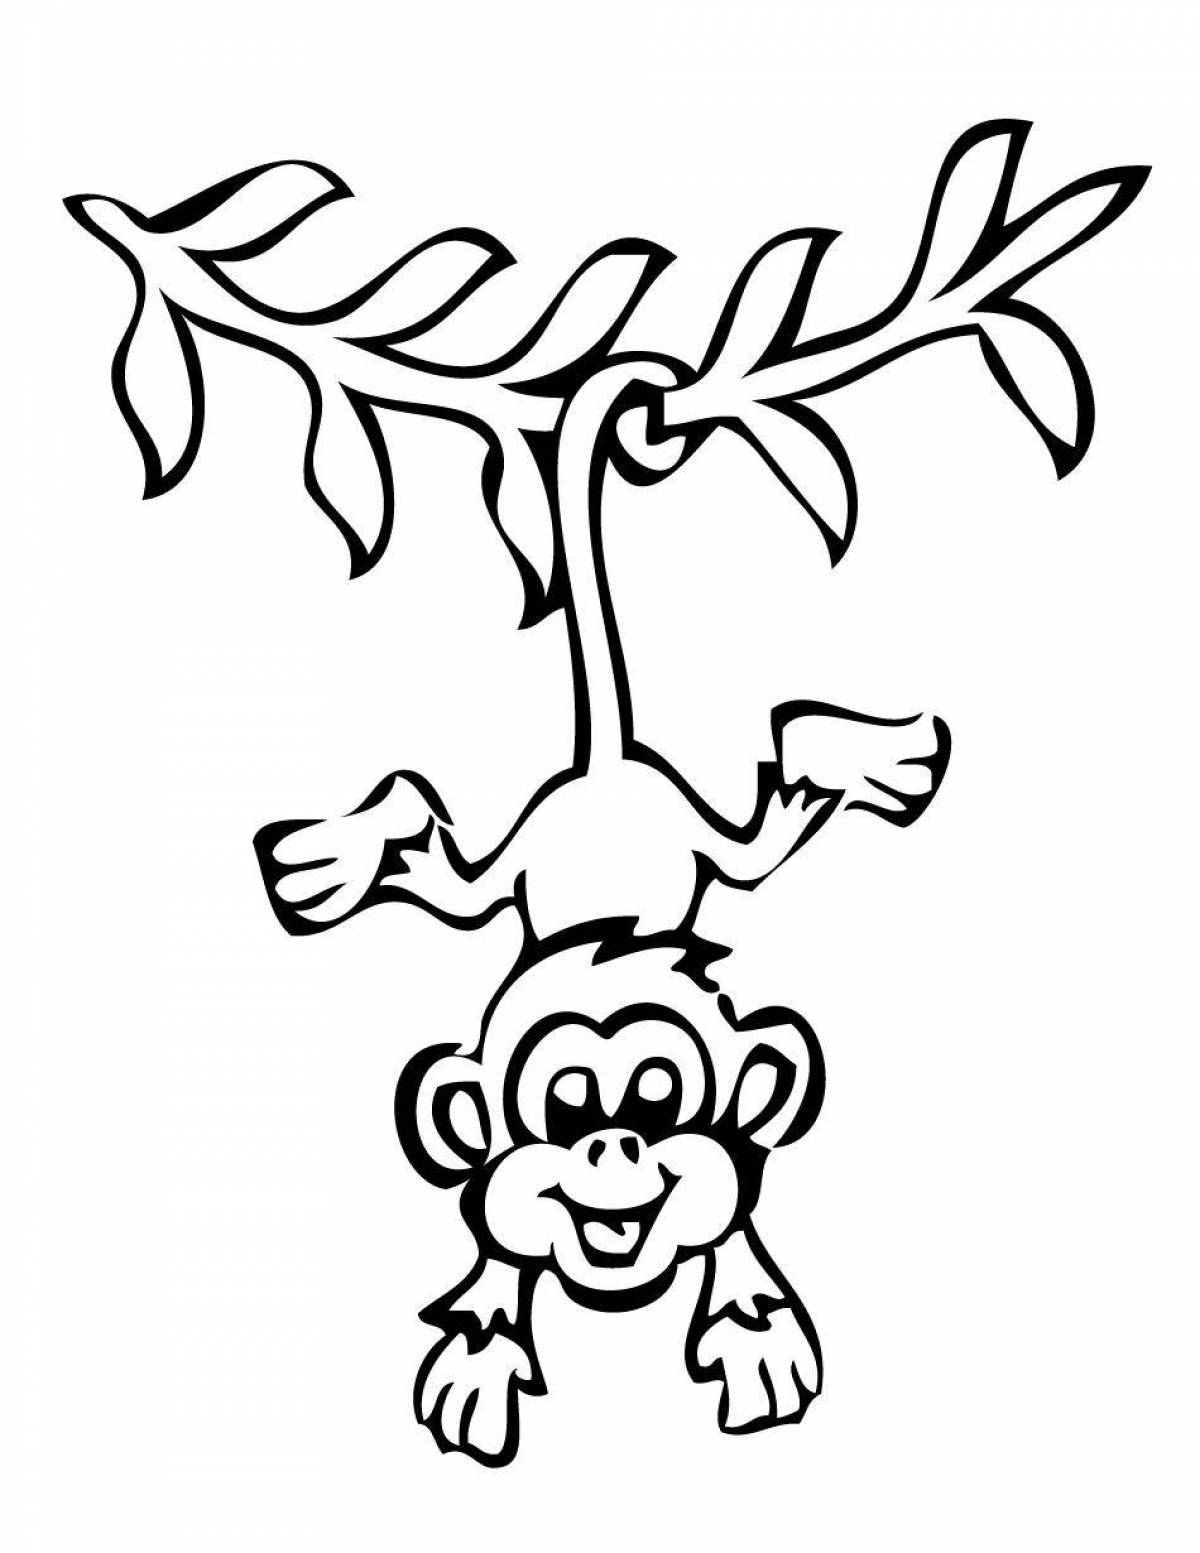 Fancy monkey coloring book for kids